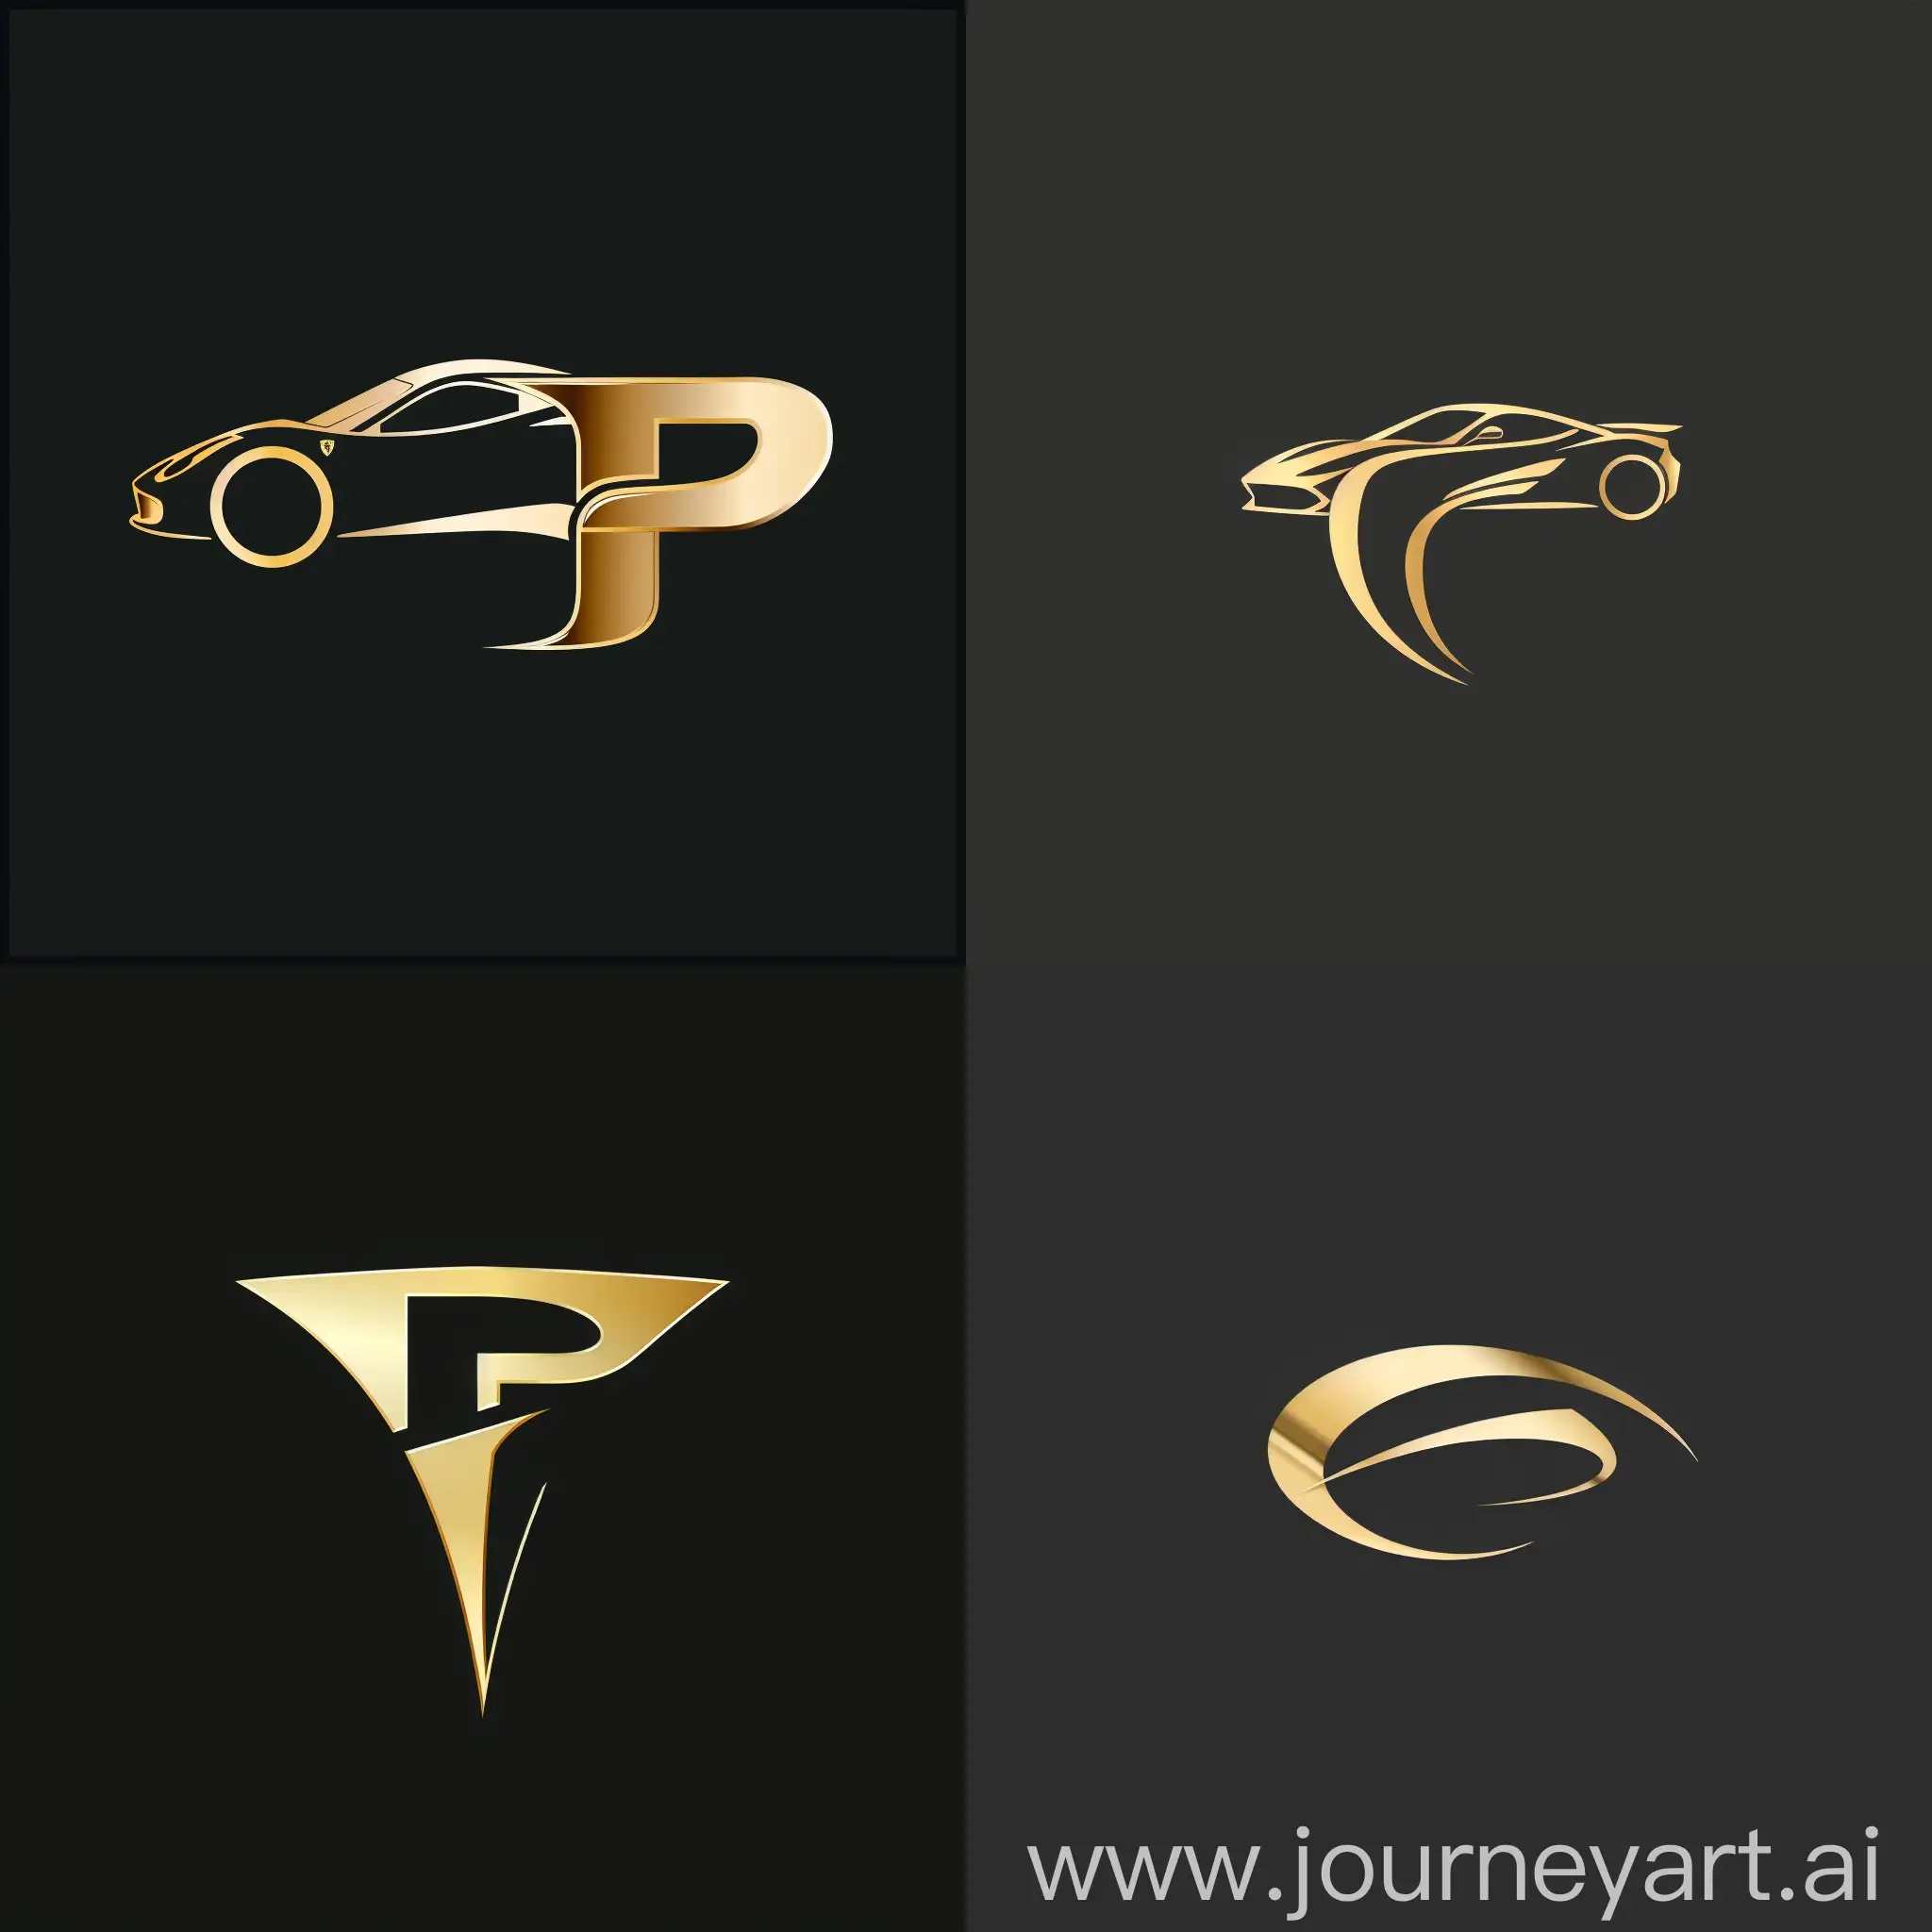 make me a logo use this verb P , ABOUT CAR DEALERSHIP , fantasy , modern ,use gold color